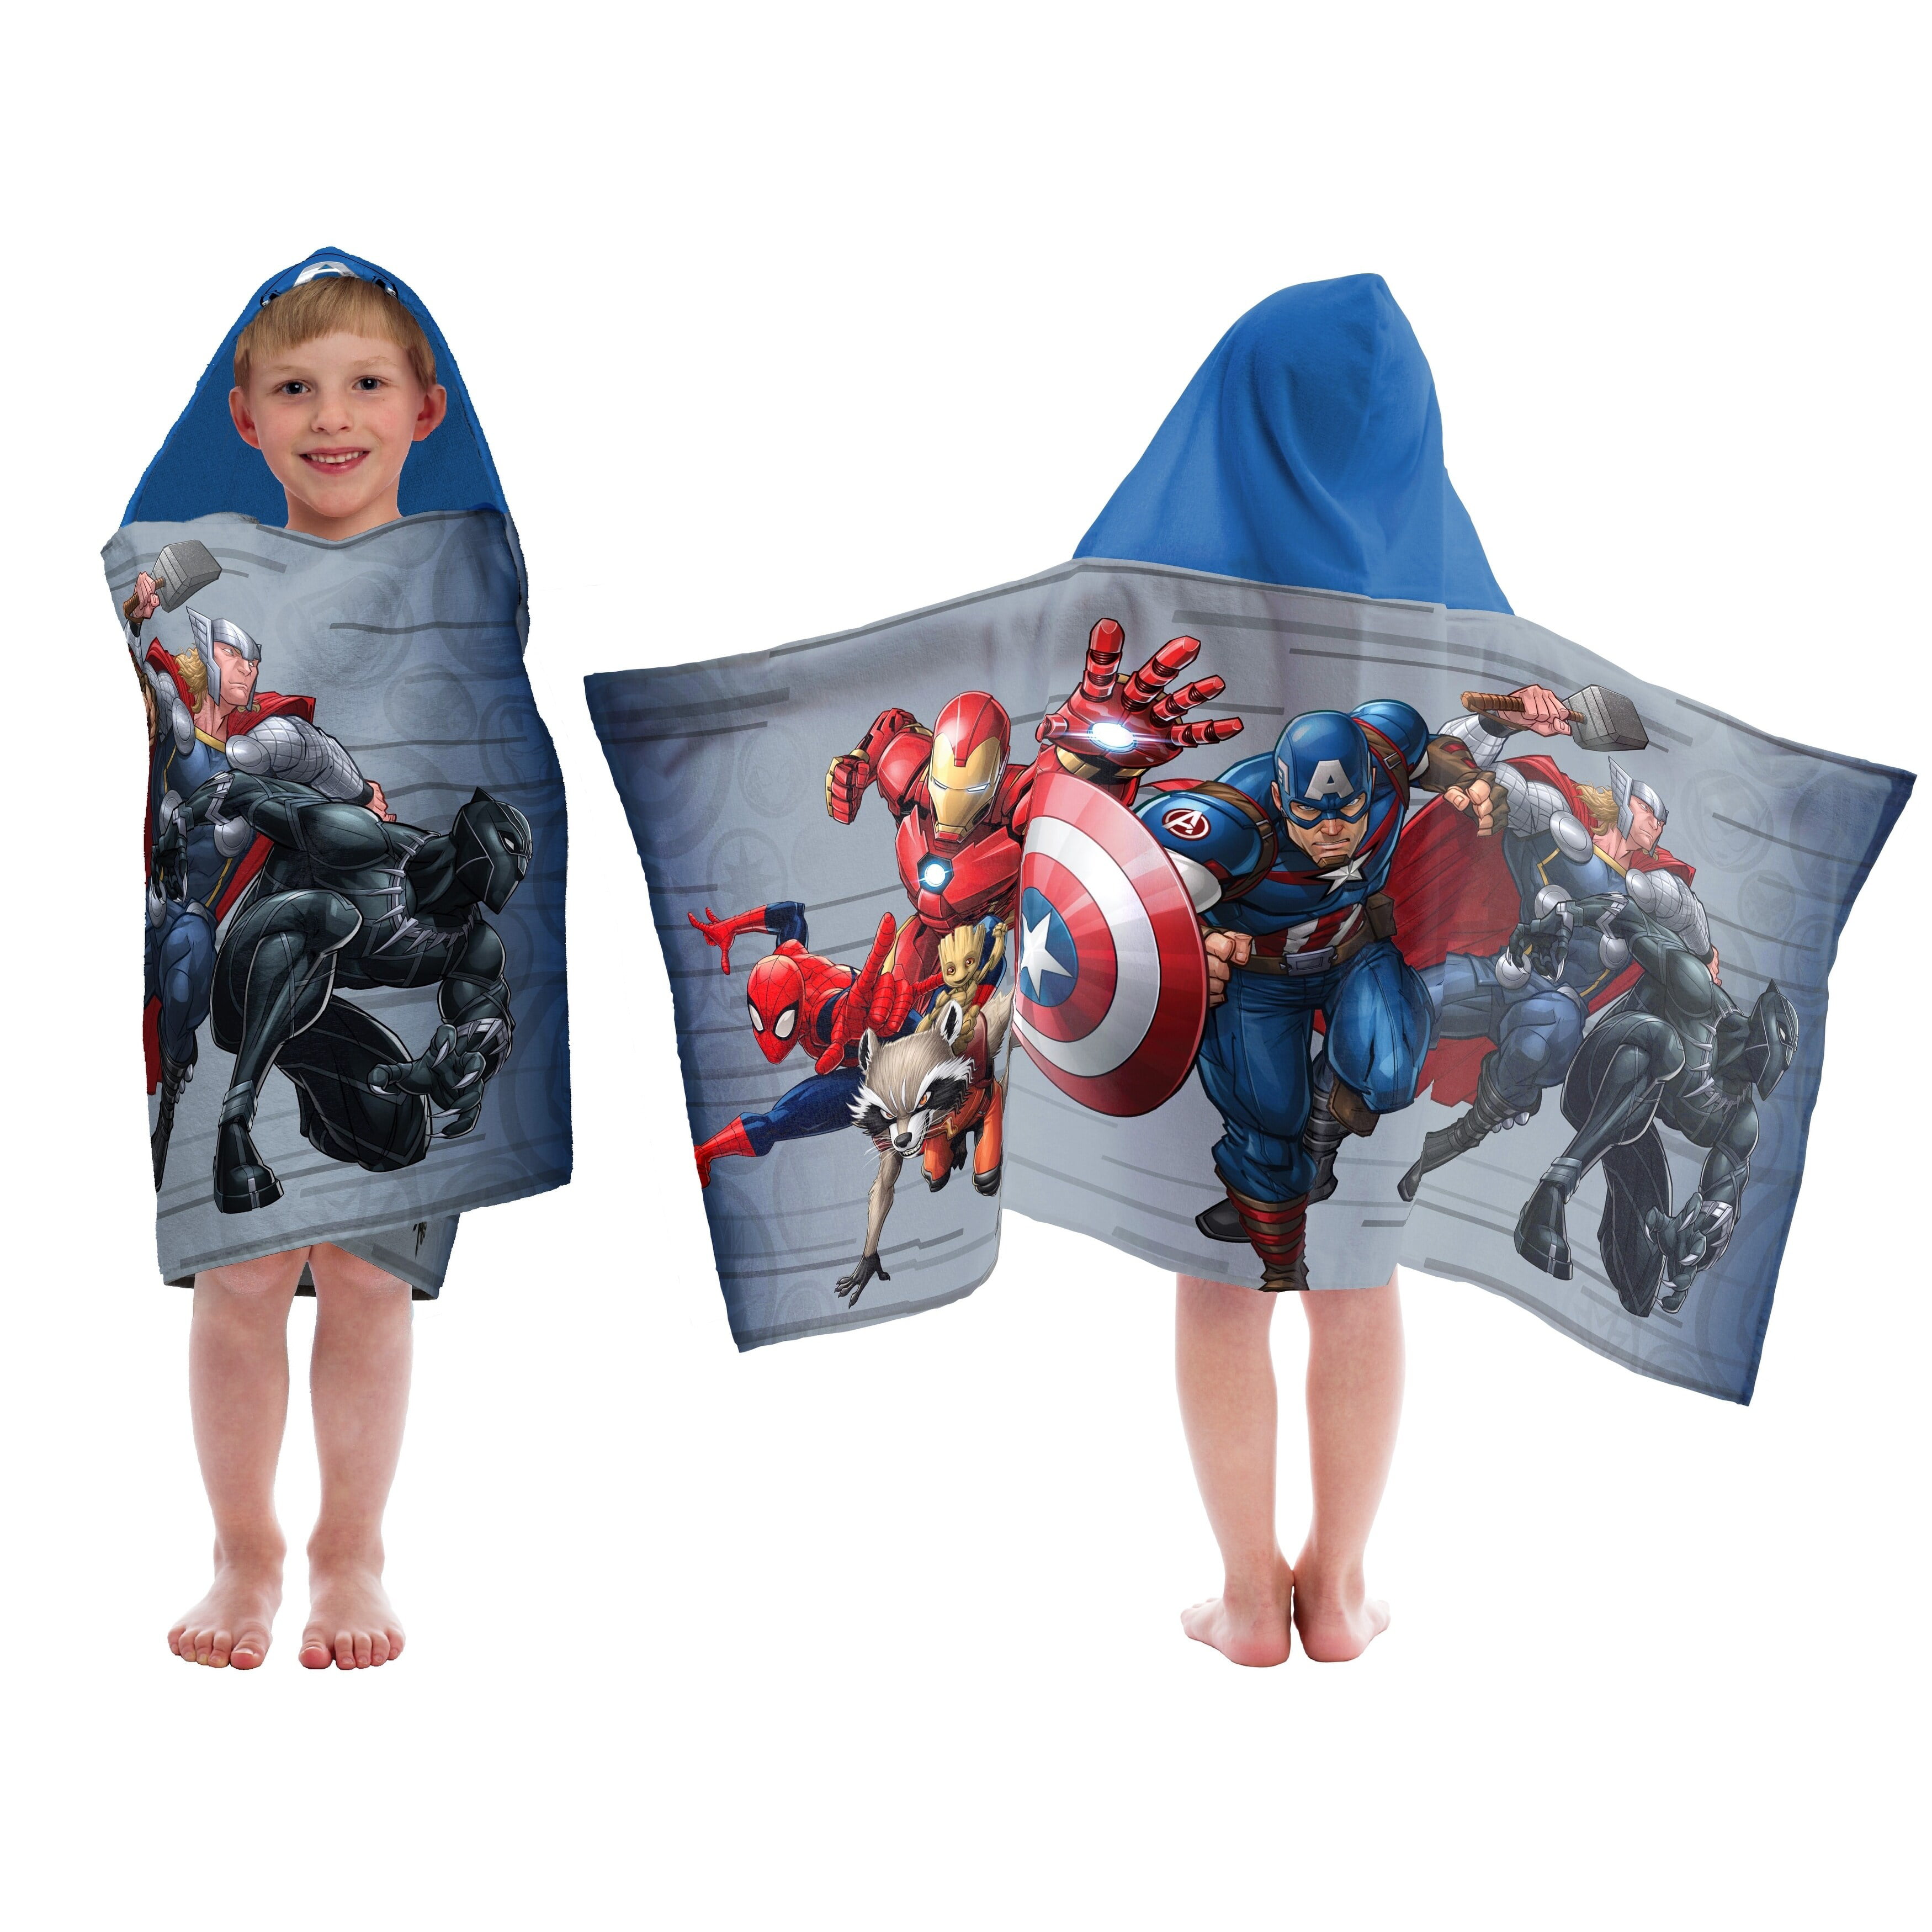 Avengers Hooded Towel for Kids 23 x 51 Inch 